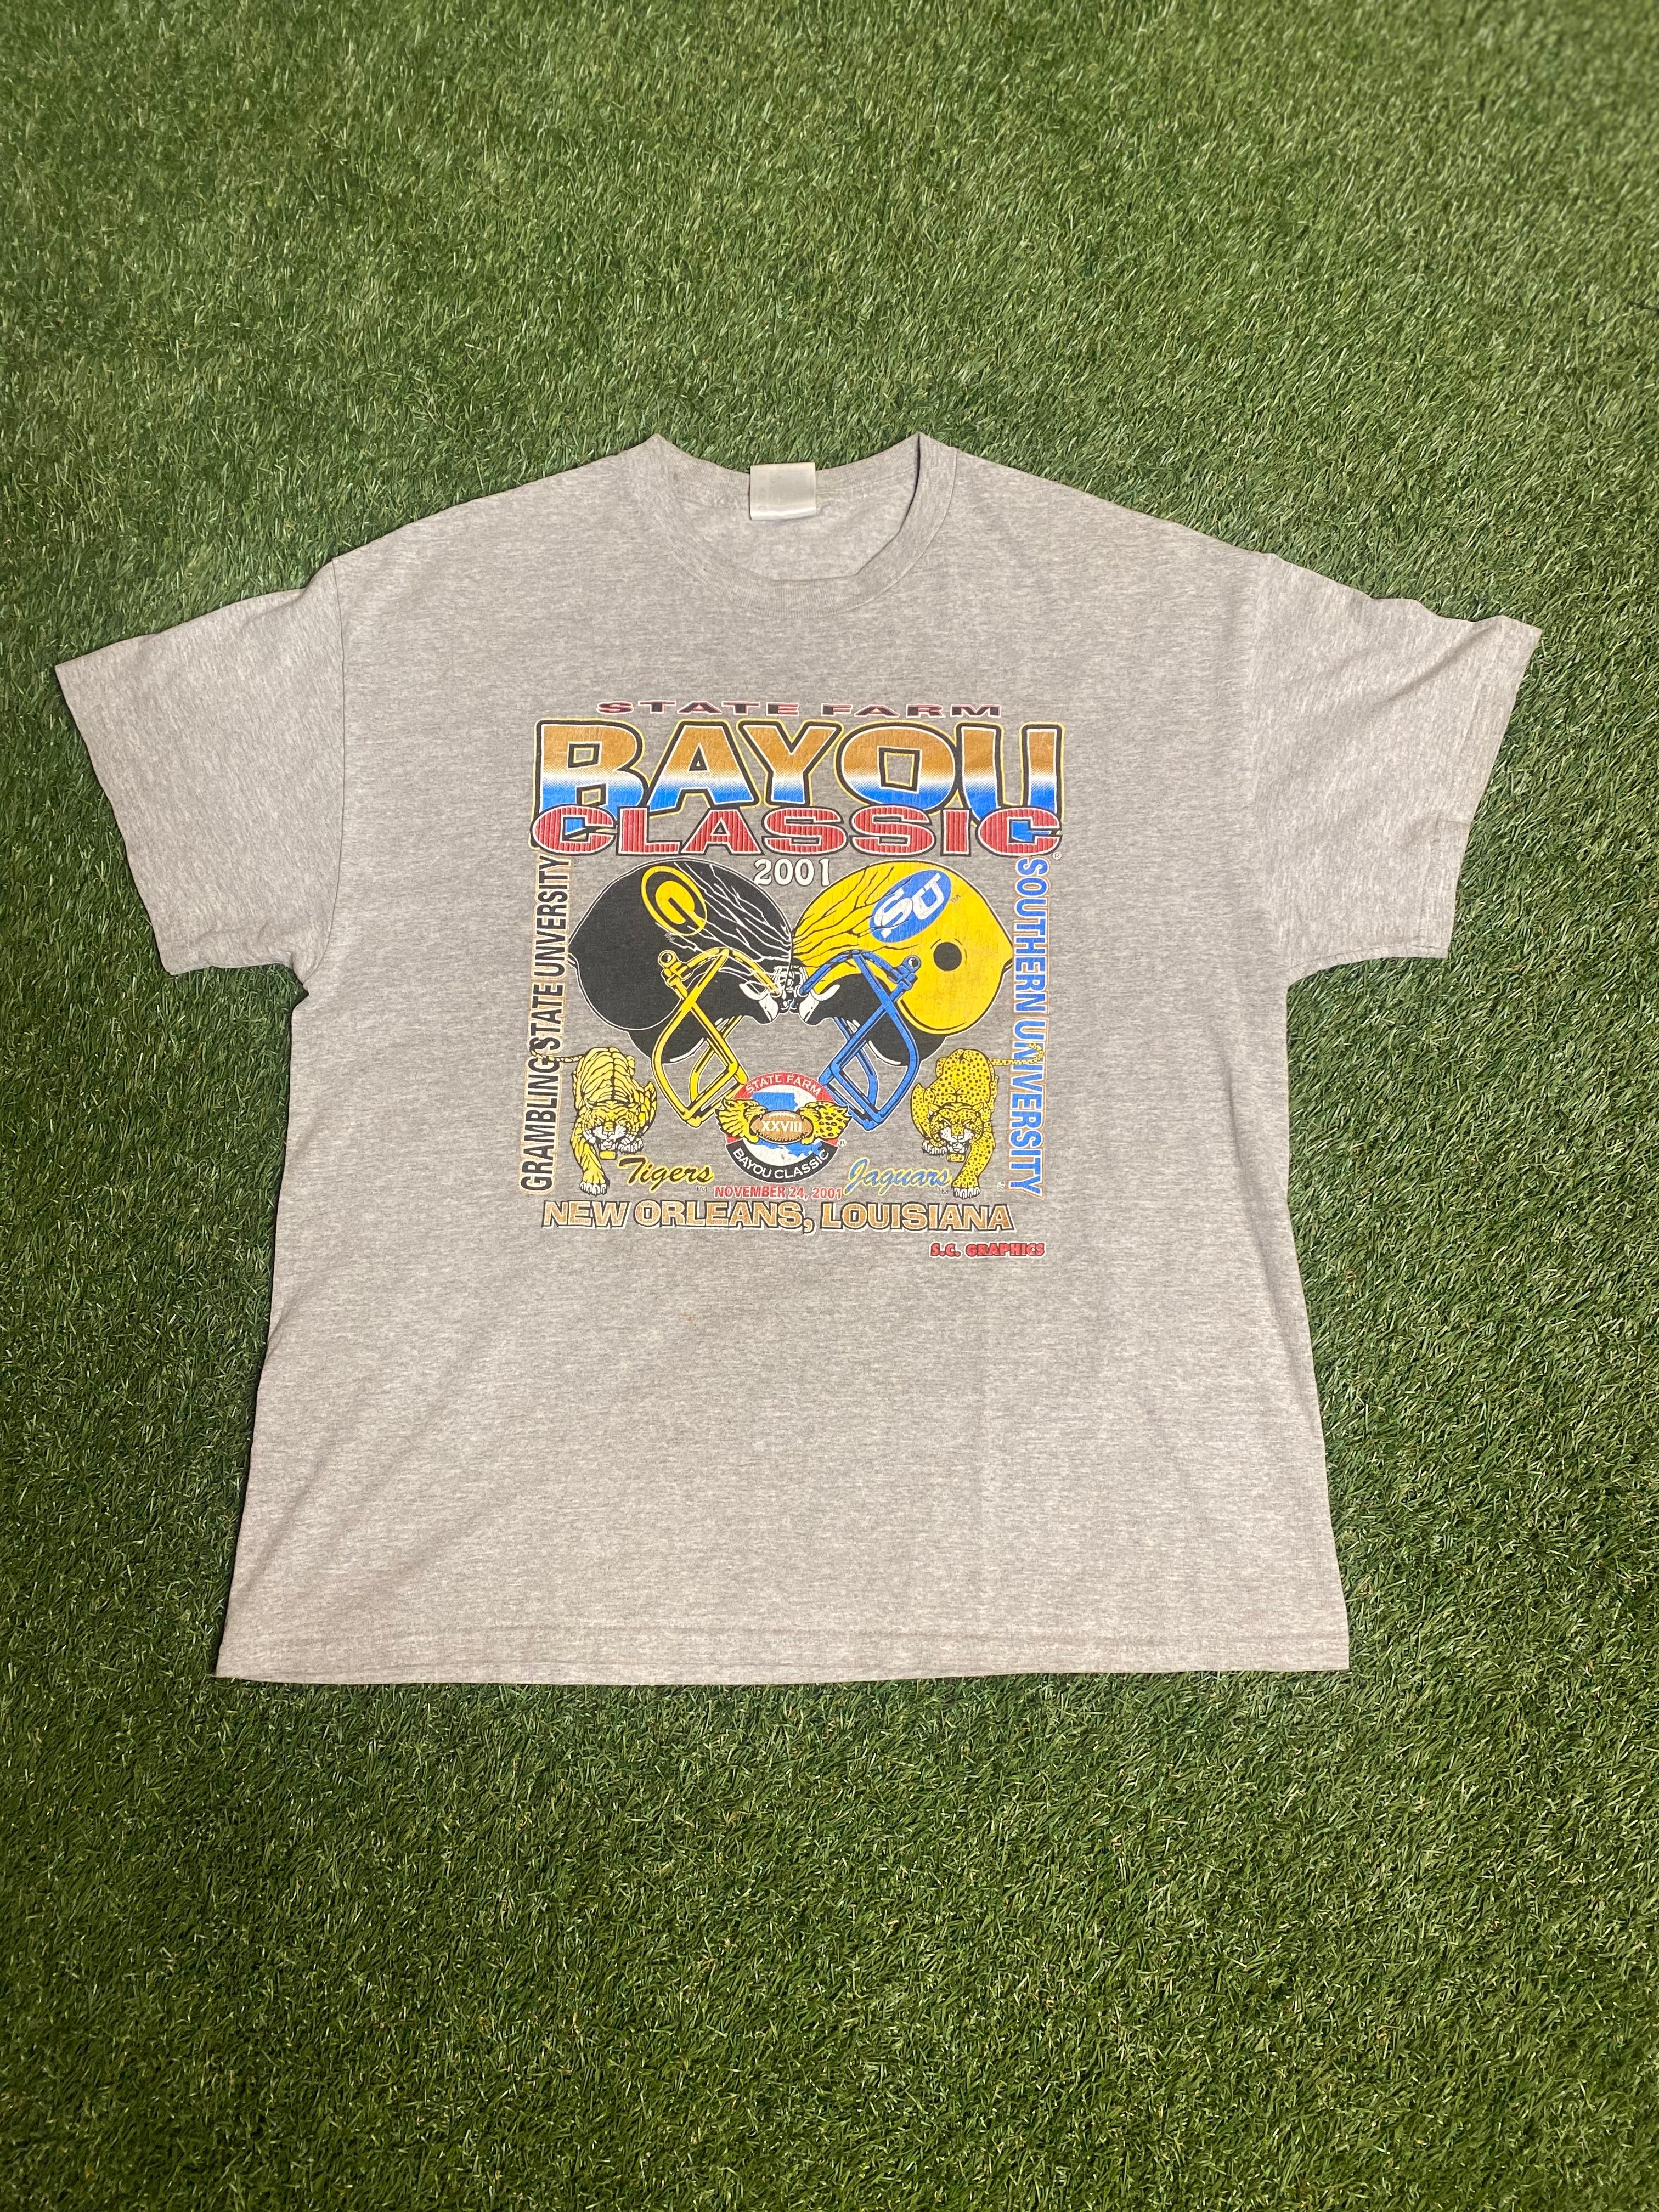 "2001 Bayou Classic" Limited Edition Vintage T-Shirt